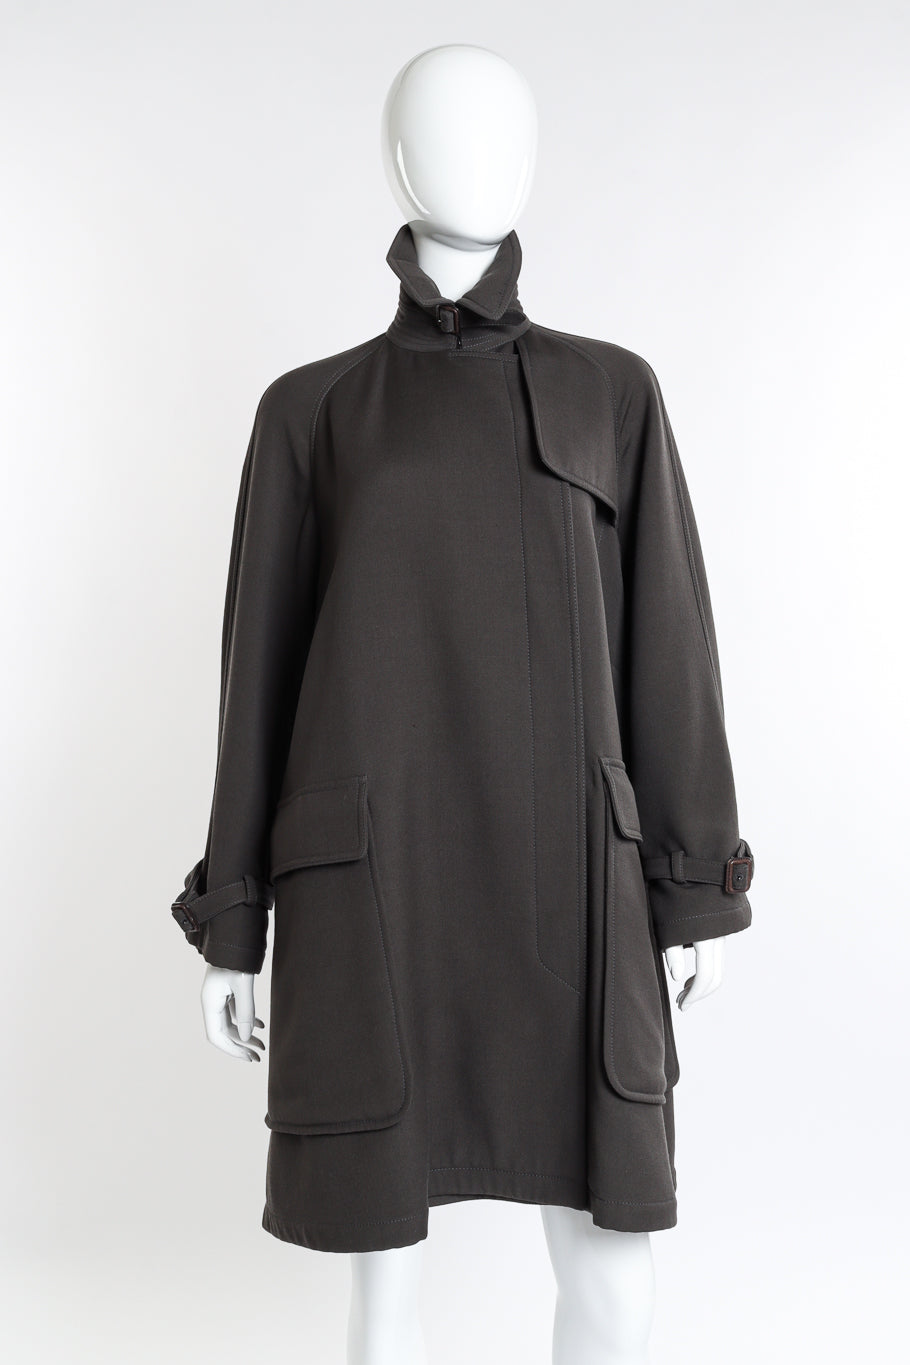 Vintage Hermés Wool Trench Coat front collar fastened on mannequin @recess la